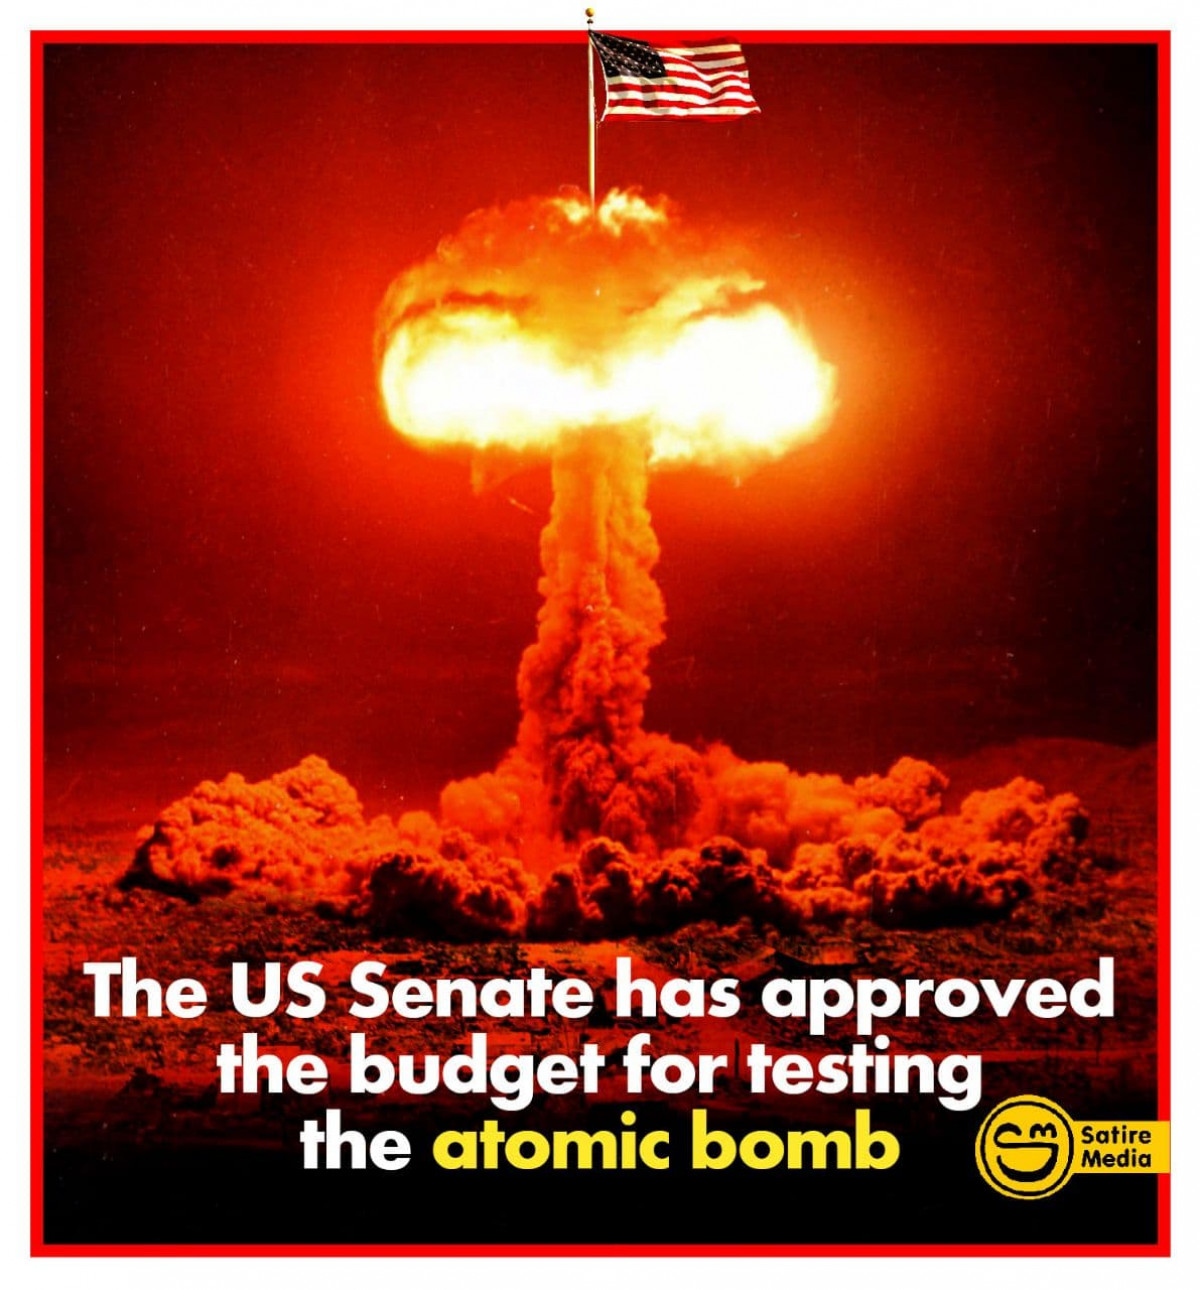 The US Senate has approved the budget for testing the atomic bomb